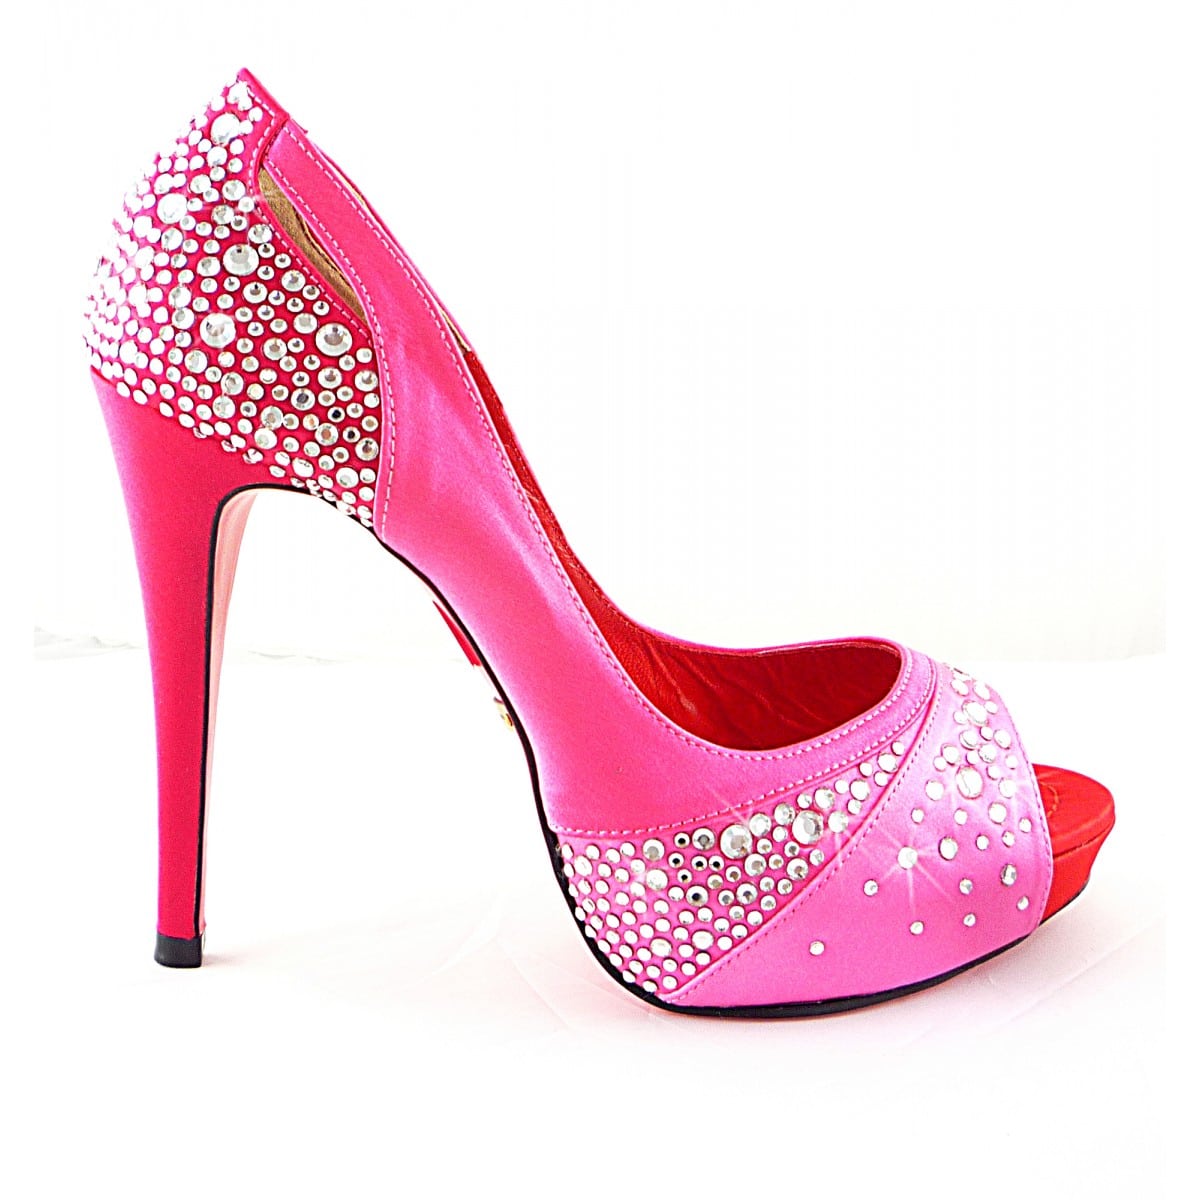 scb-pink-couture-crystal-peep-toe